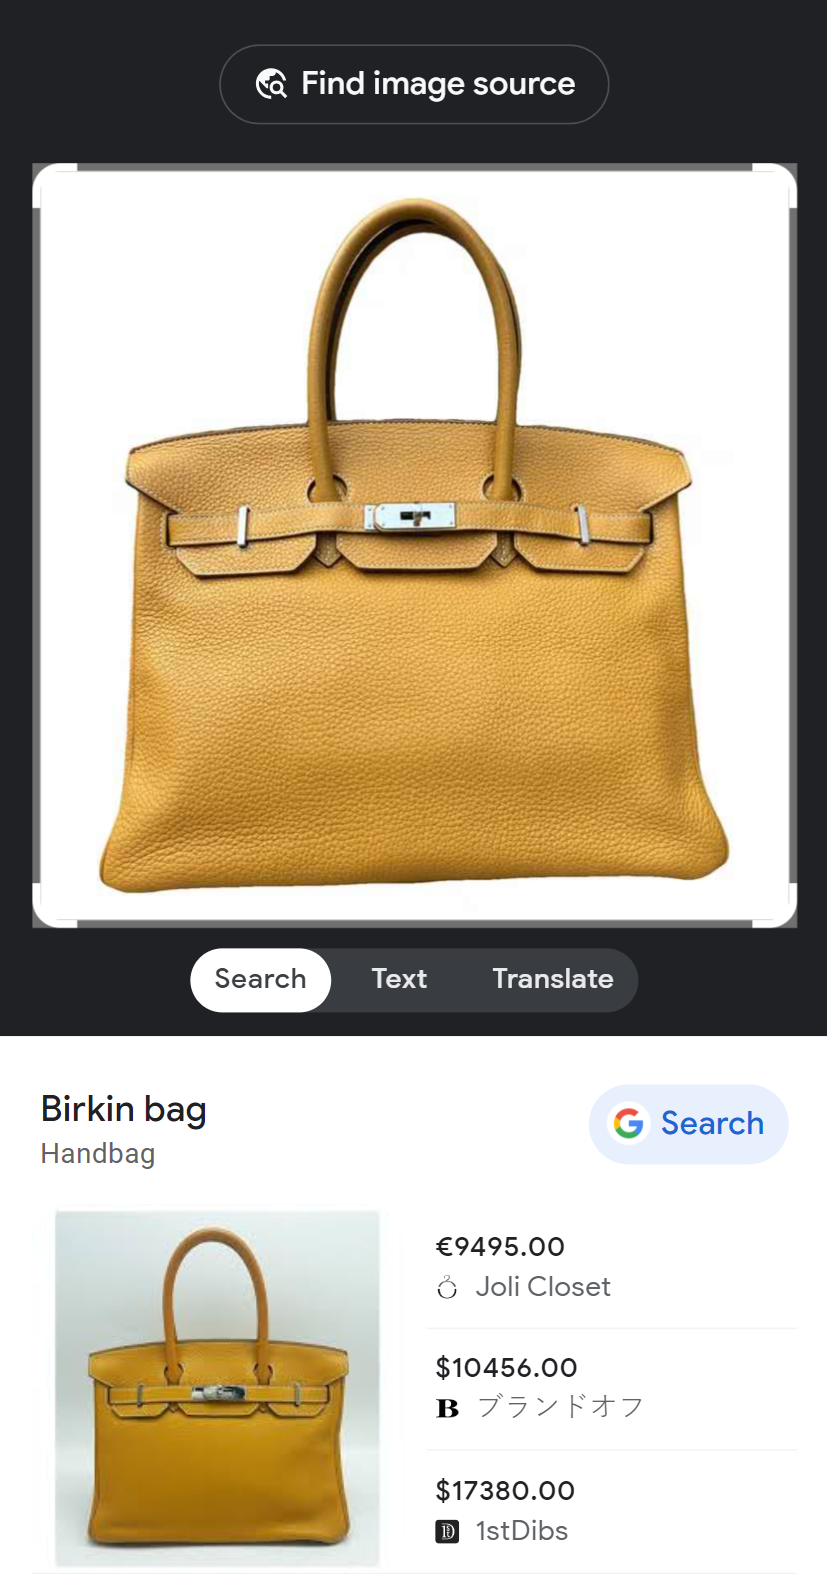 A picture of a yellow handbag on a google search page.